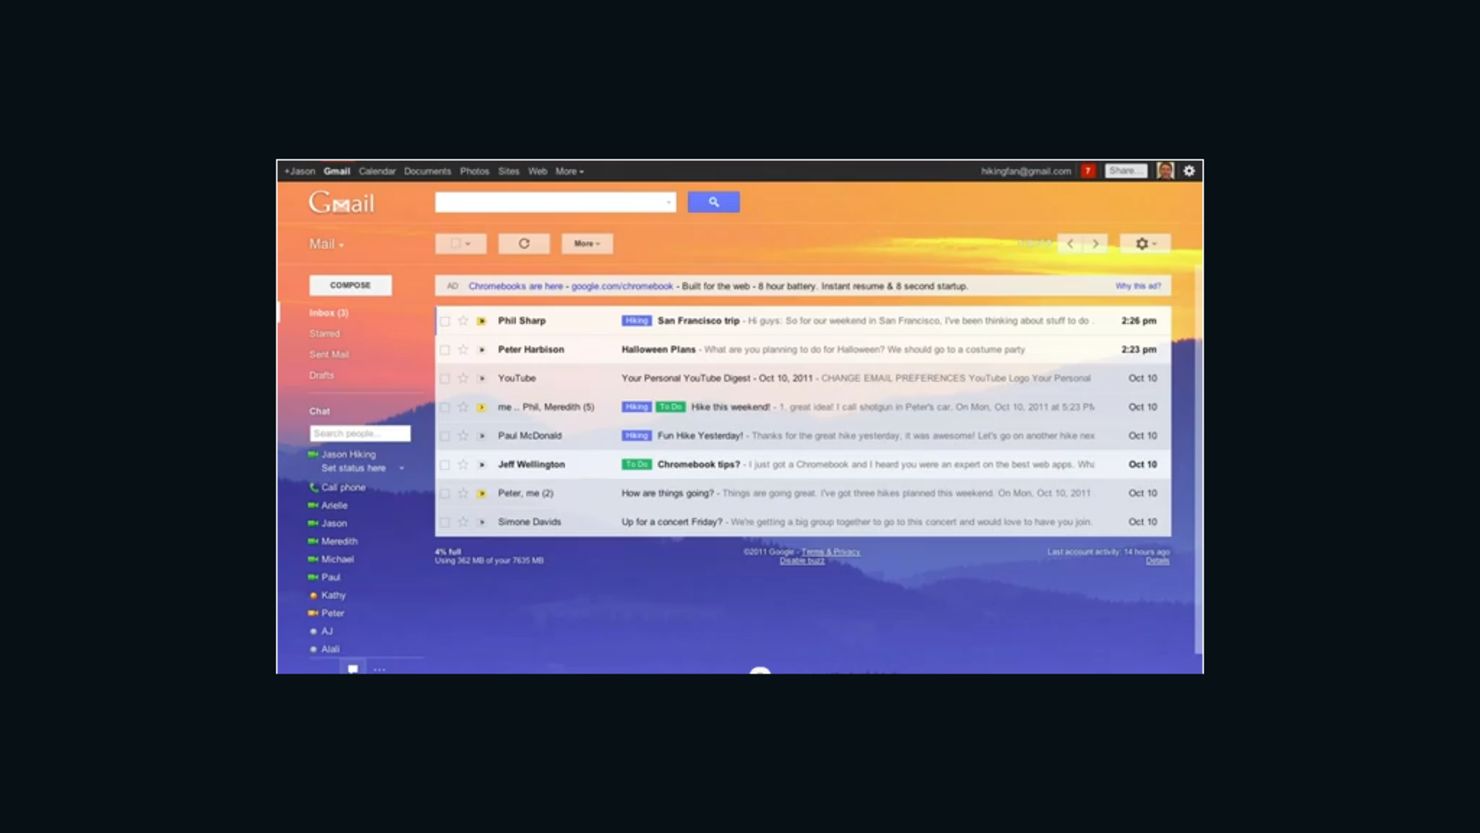 There will be a variety of new changes to Gmail that will give users more control over the look of the service.